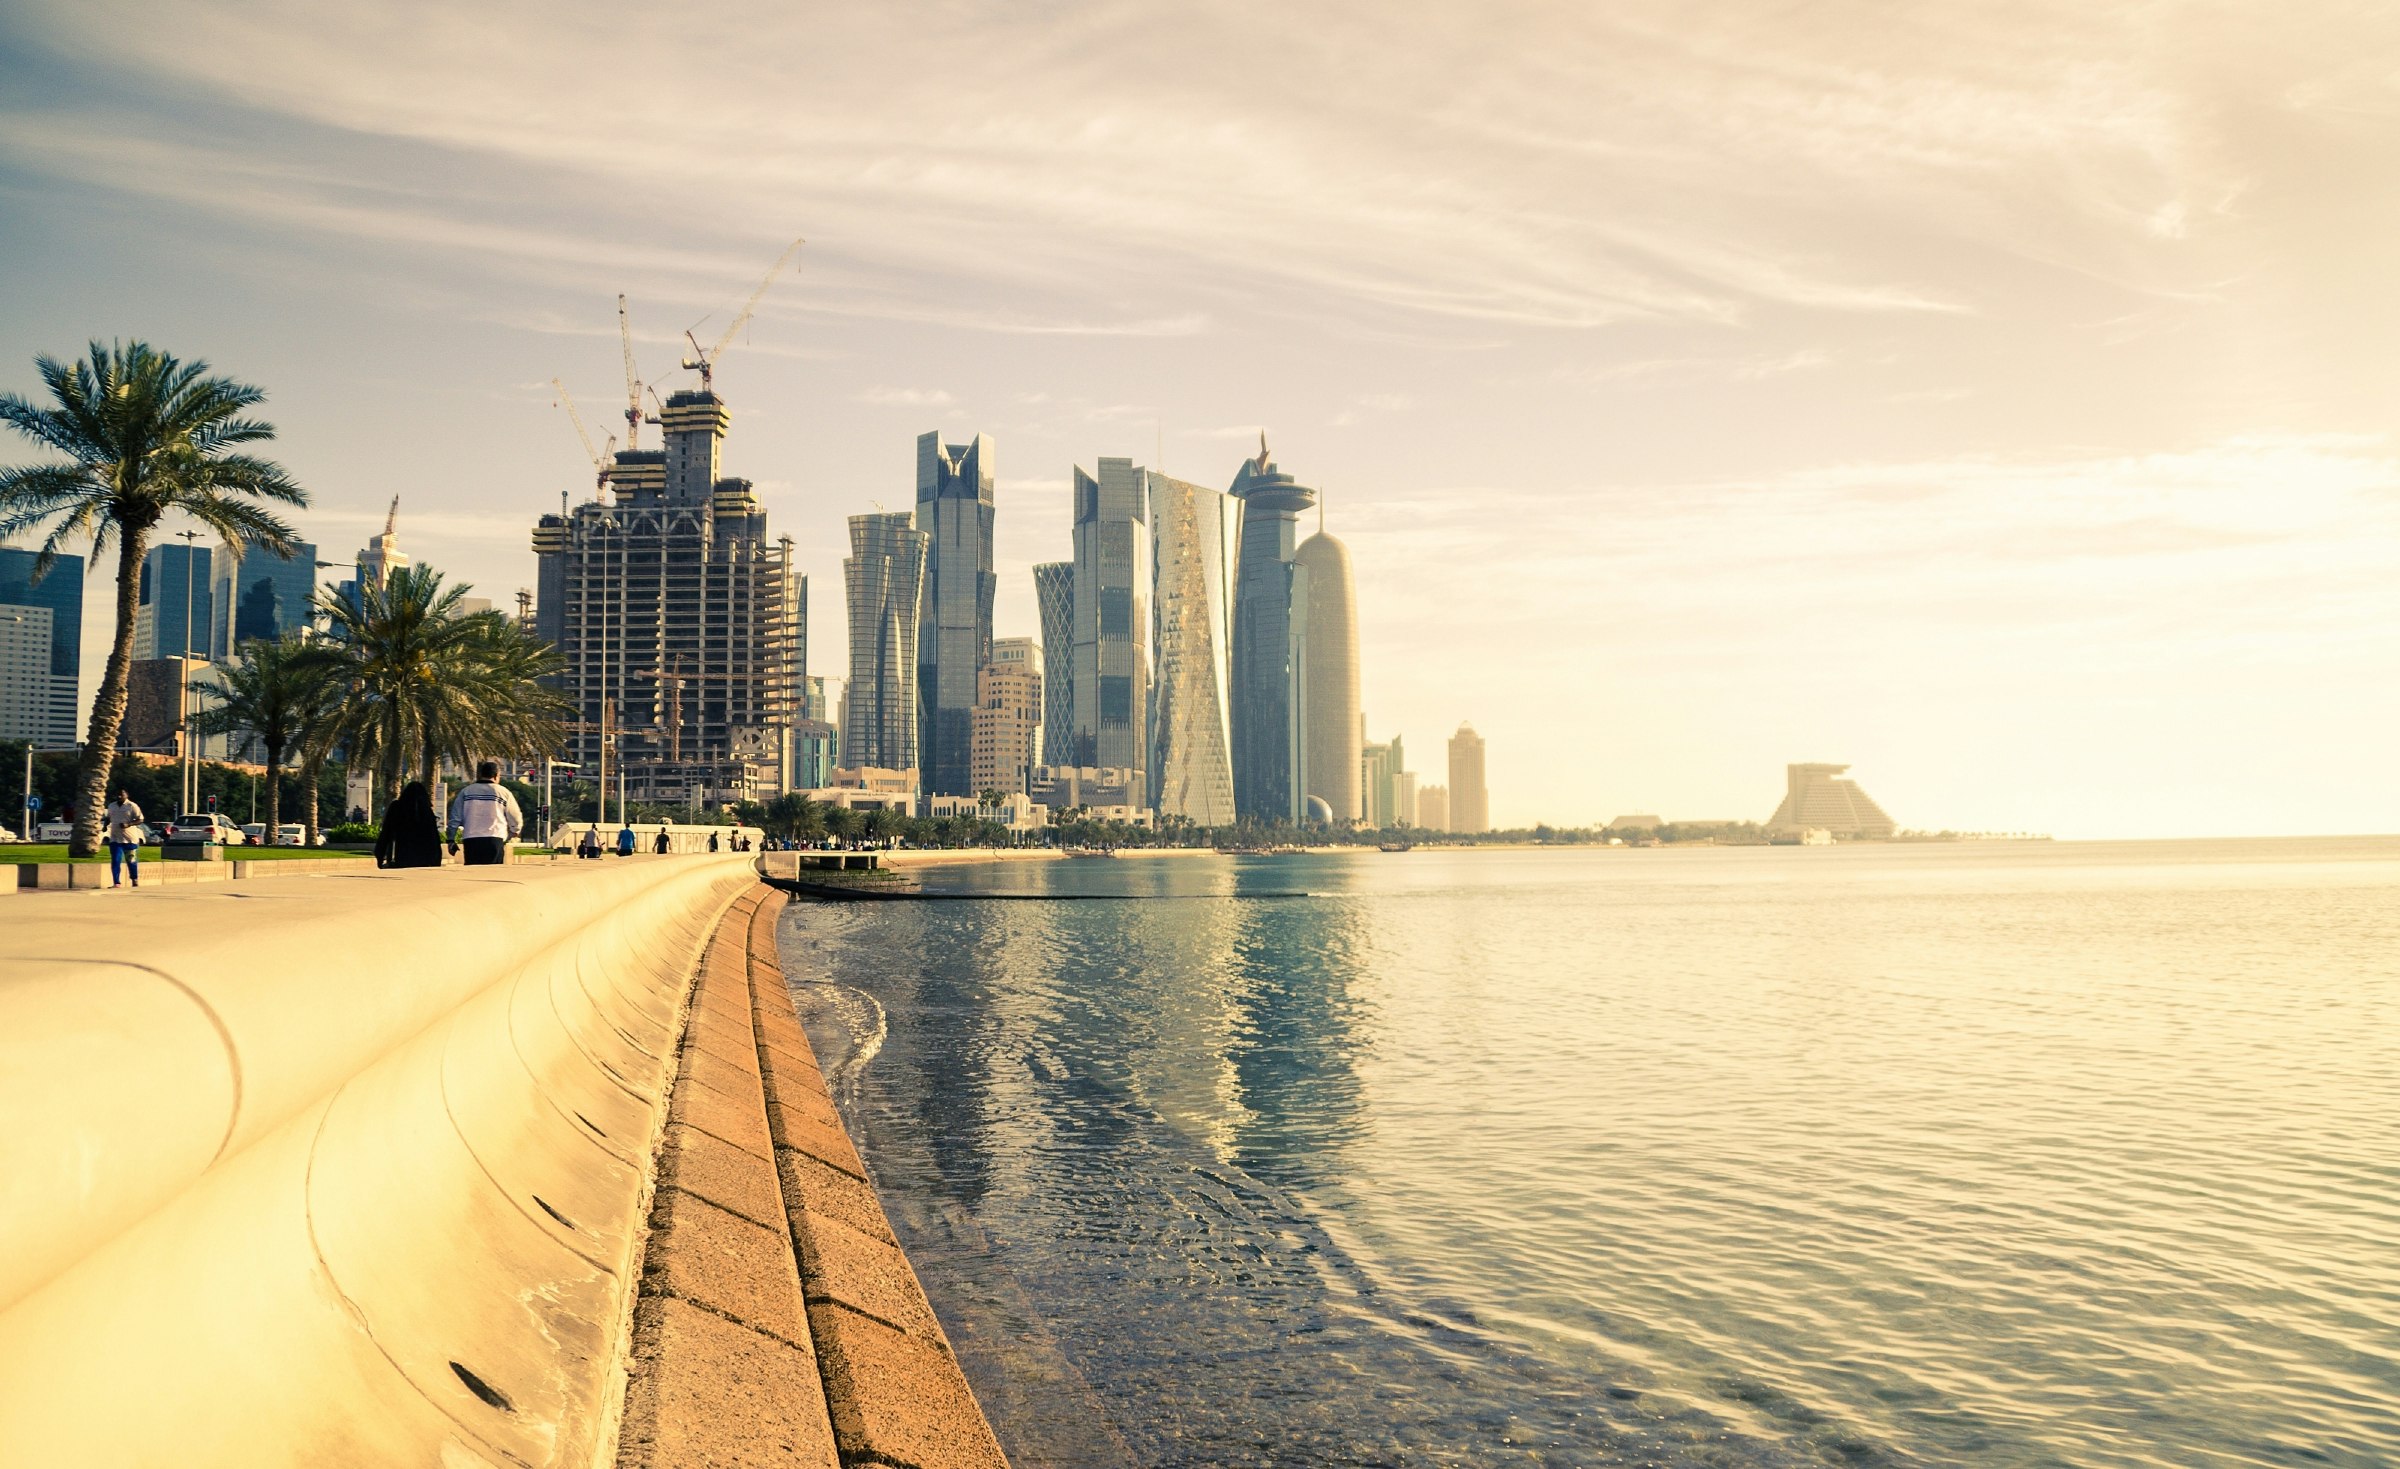 The skyline of Doha in Qatar pictured with a beach